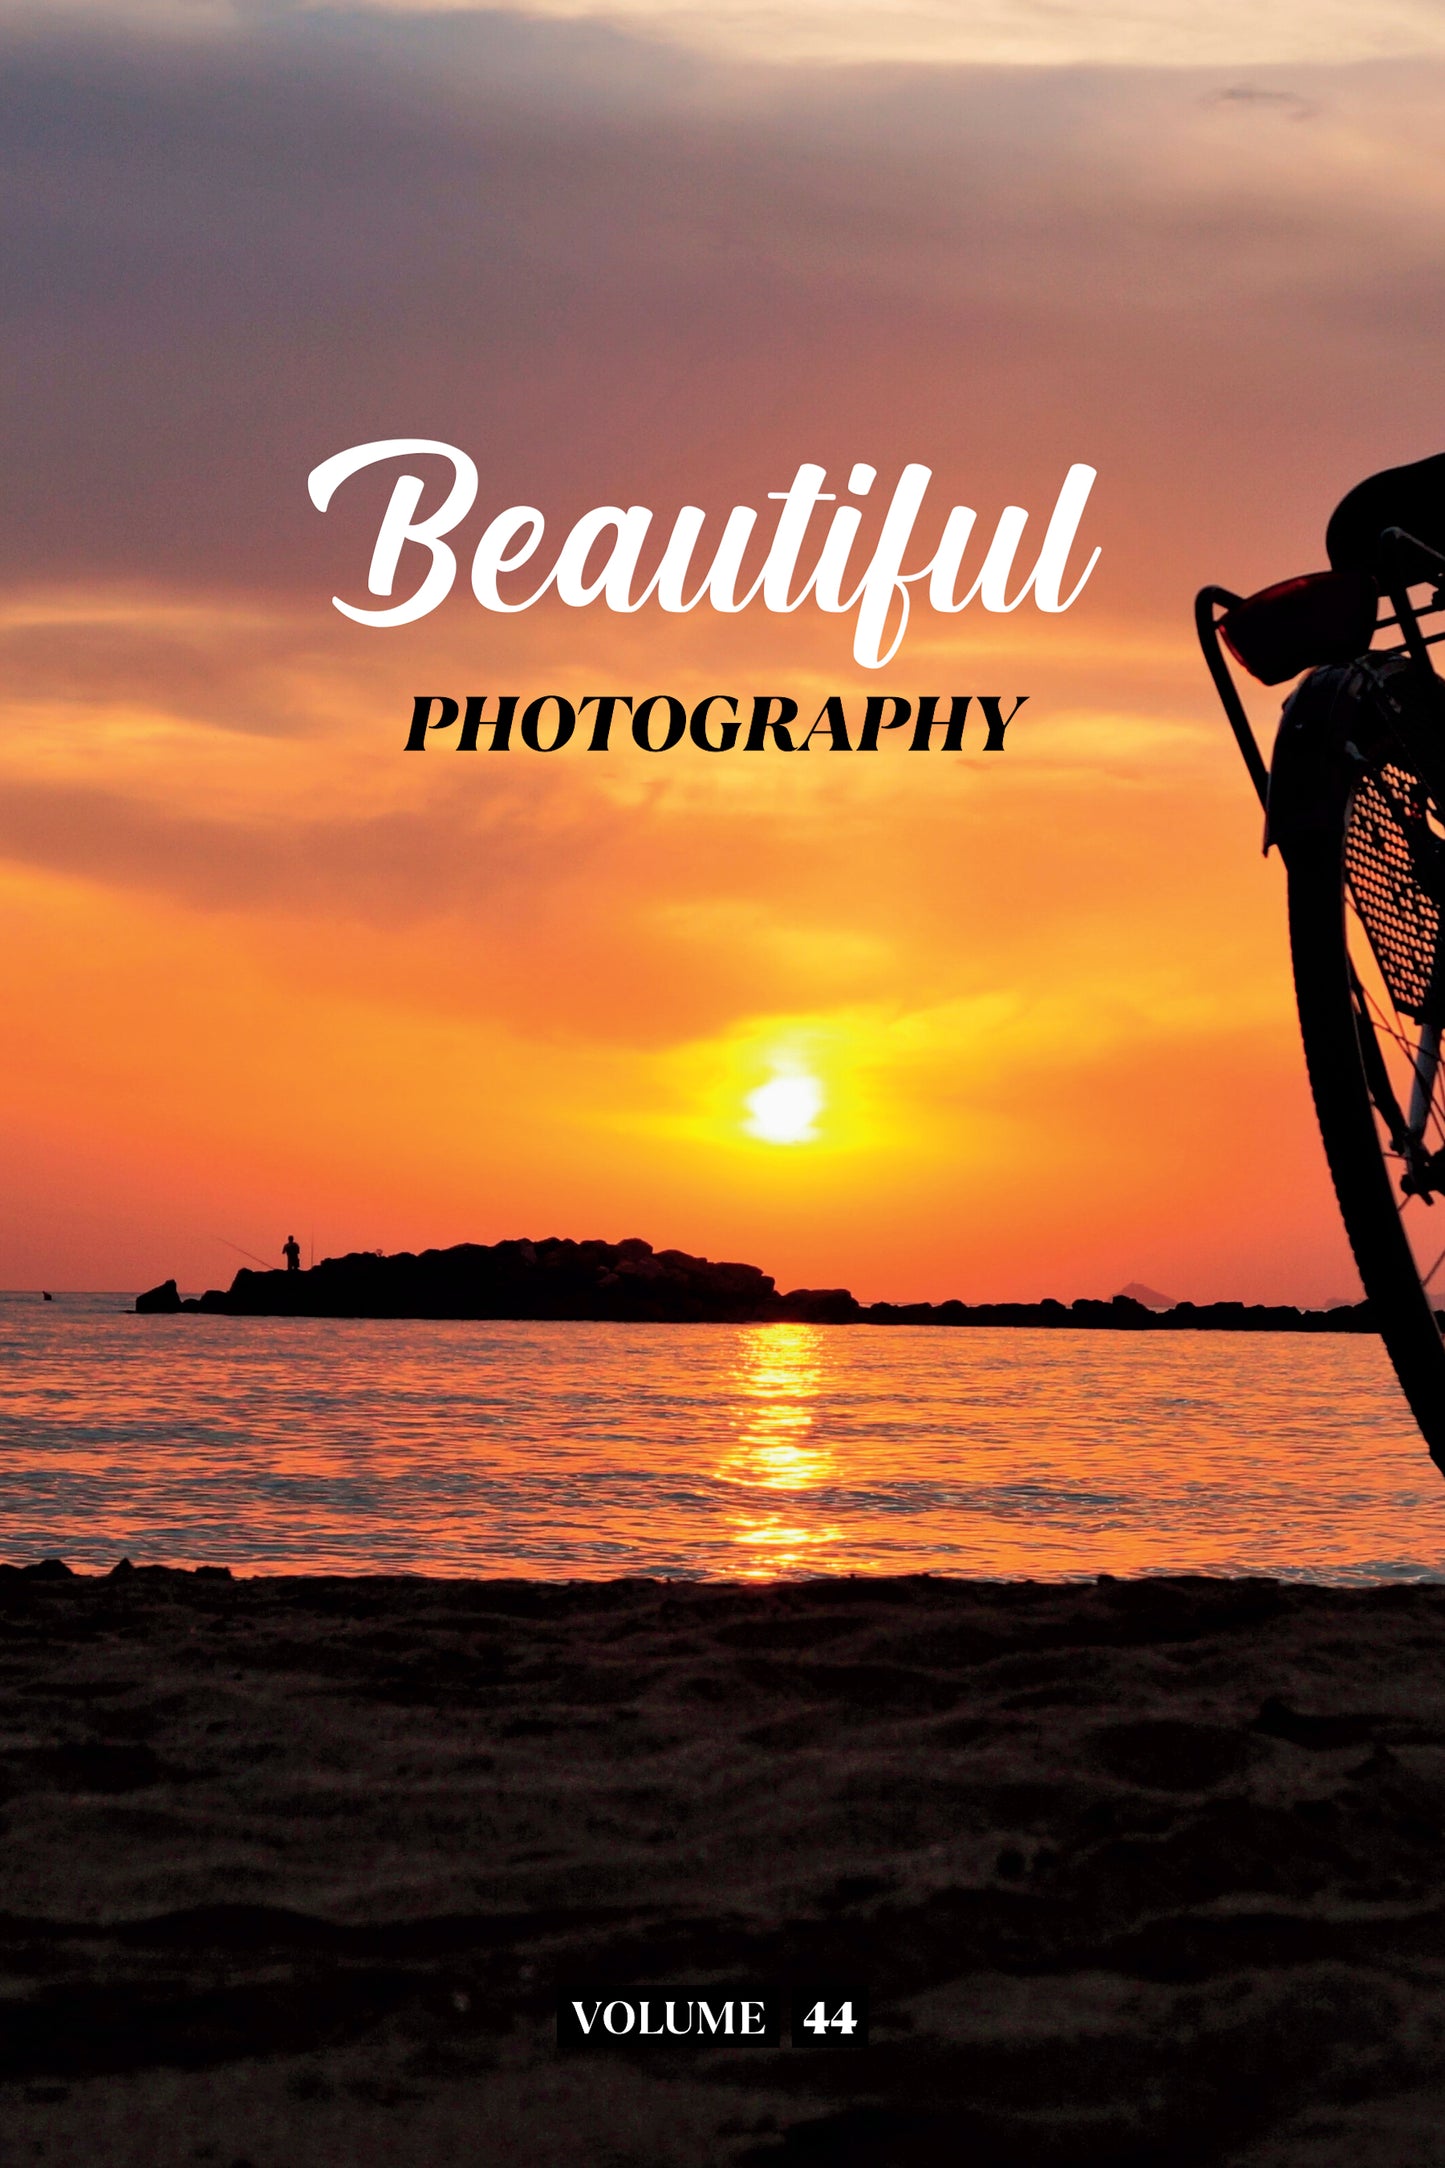 Beautiful Photography Volume 44 (Physical Book Pre-Order)